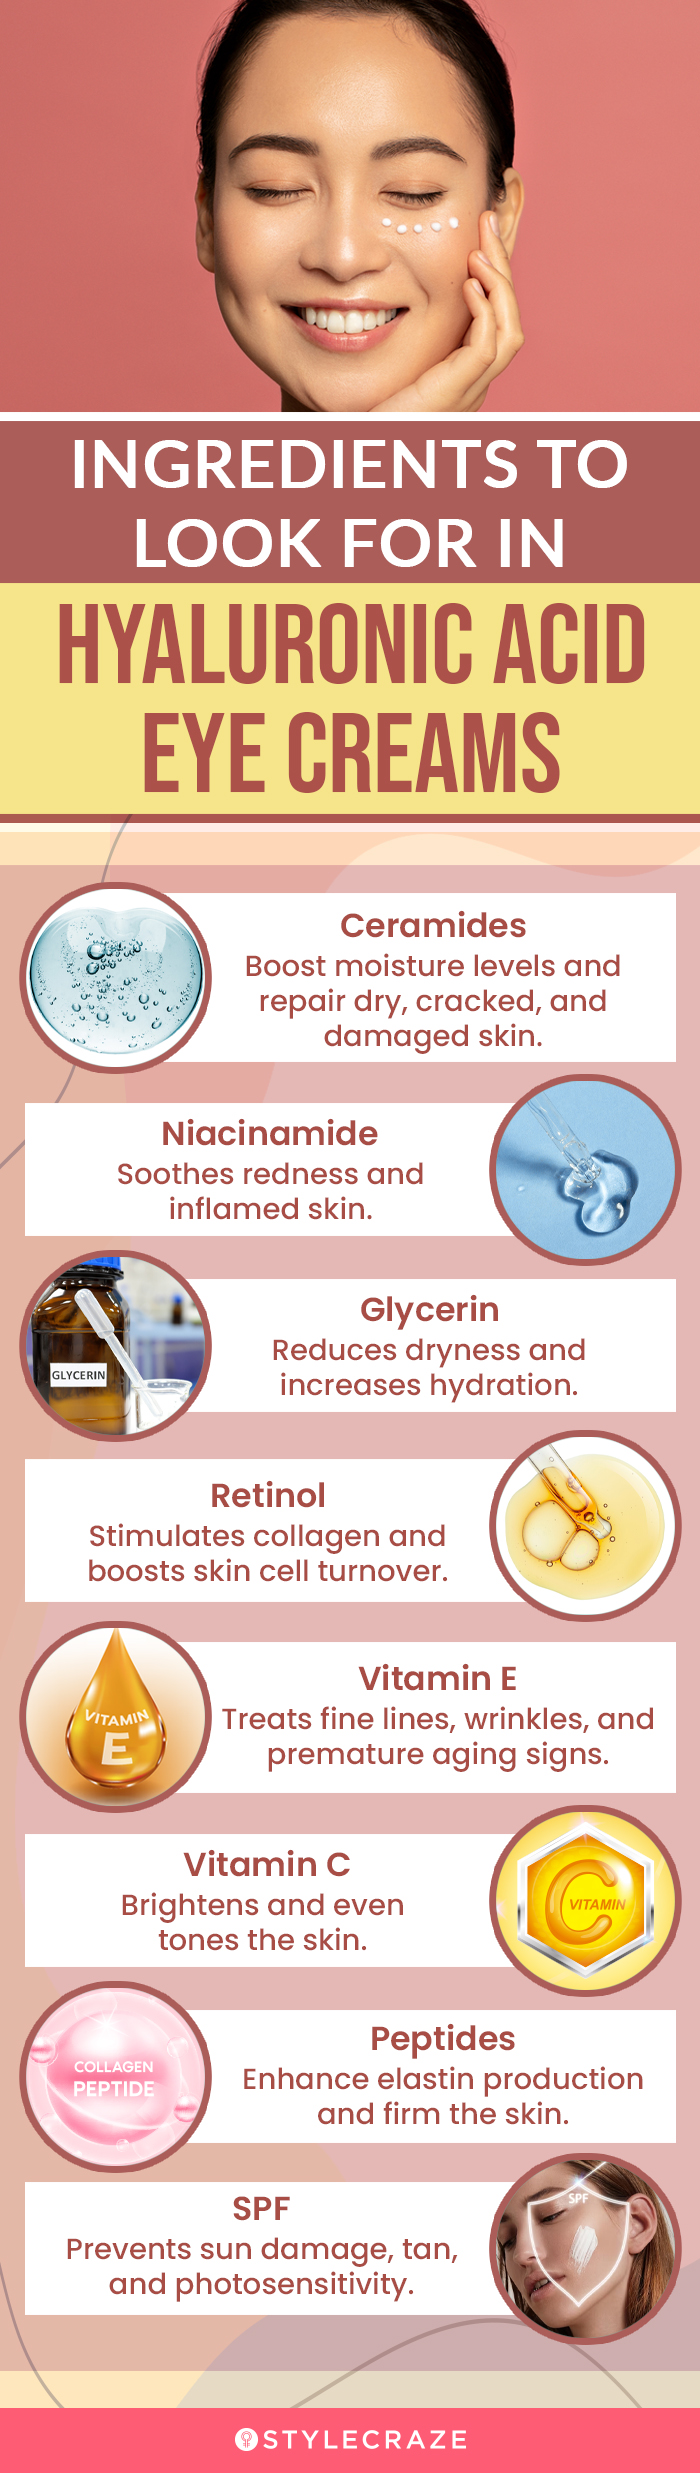 Ingredients To Look For In Hyaluronic Acid Eye Creams (infographic)